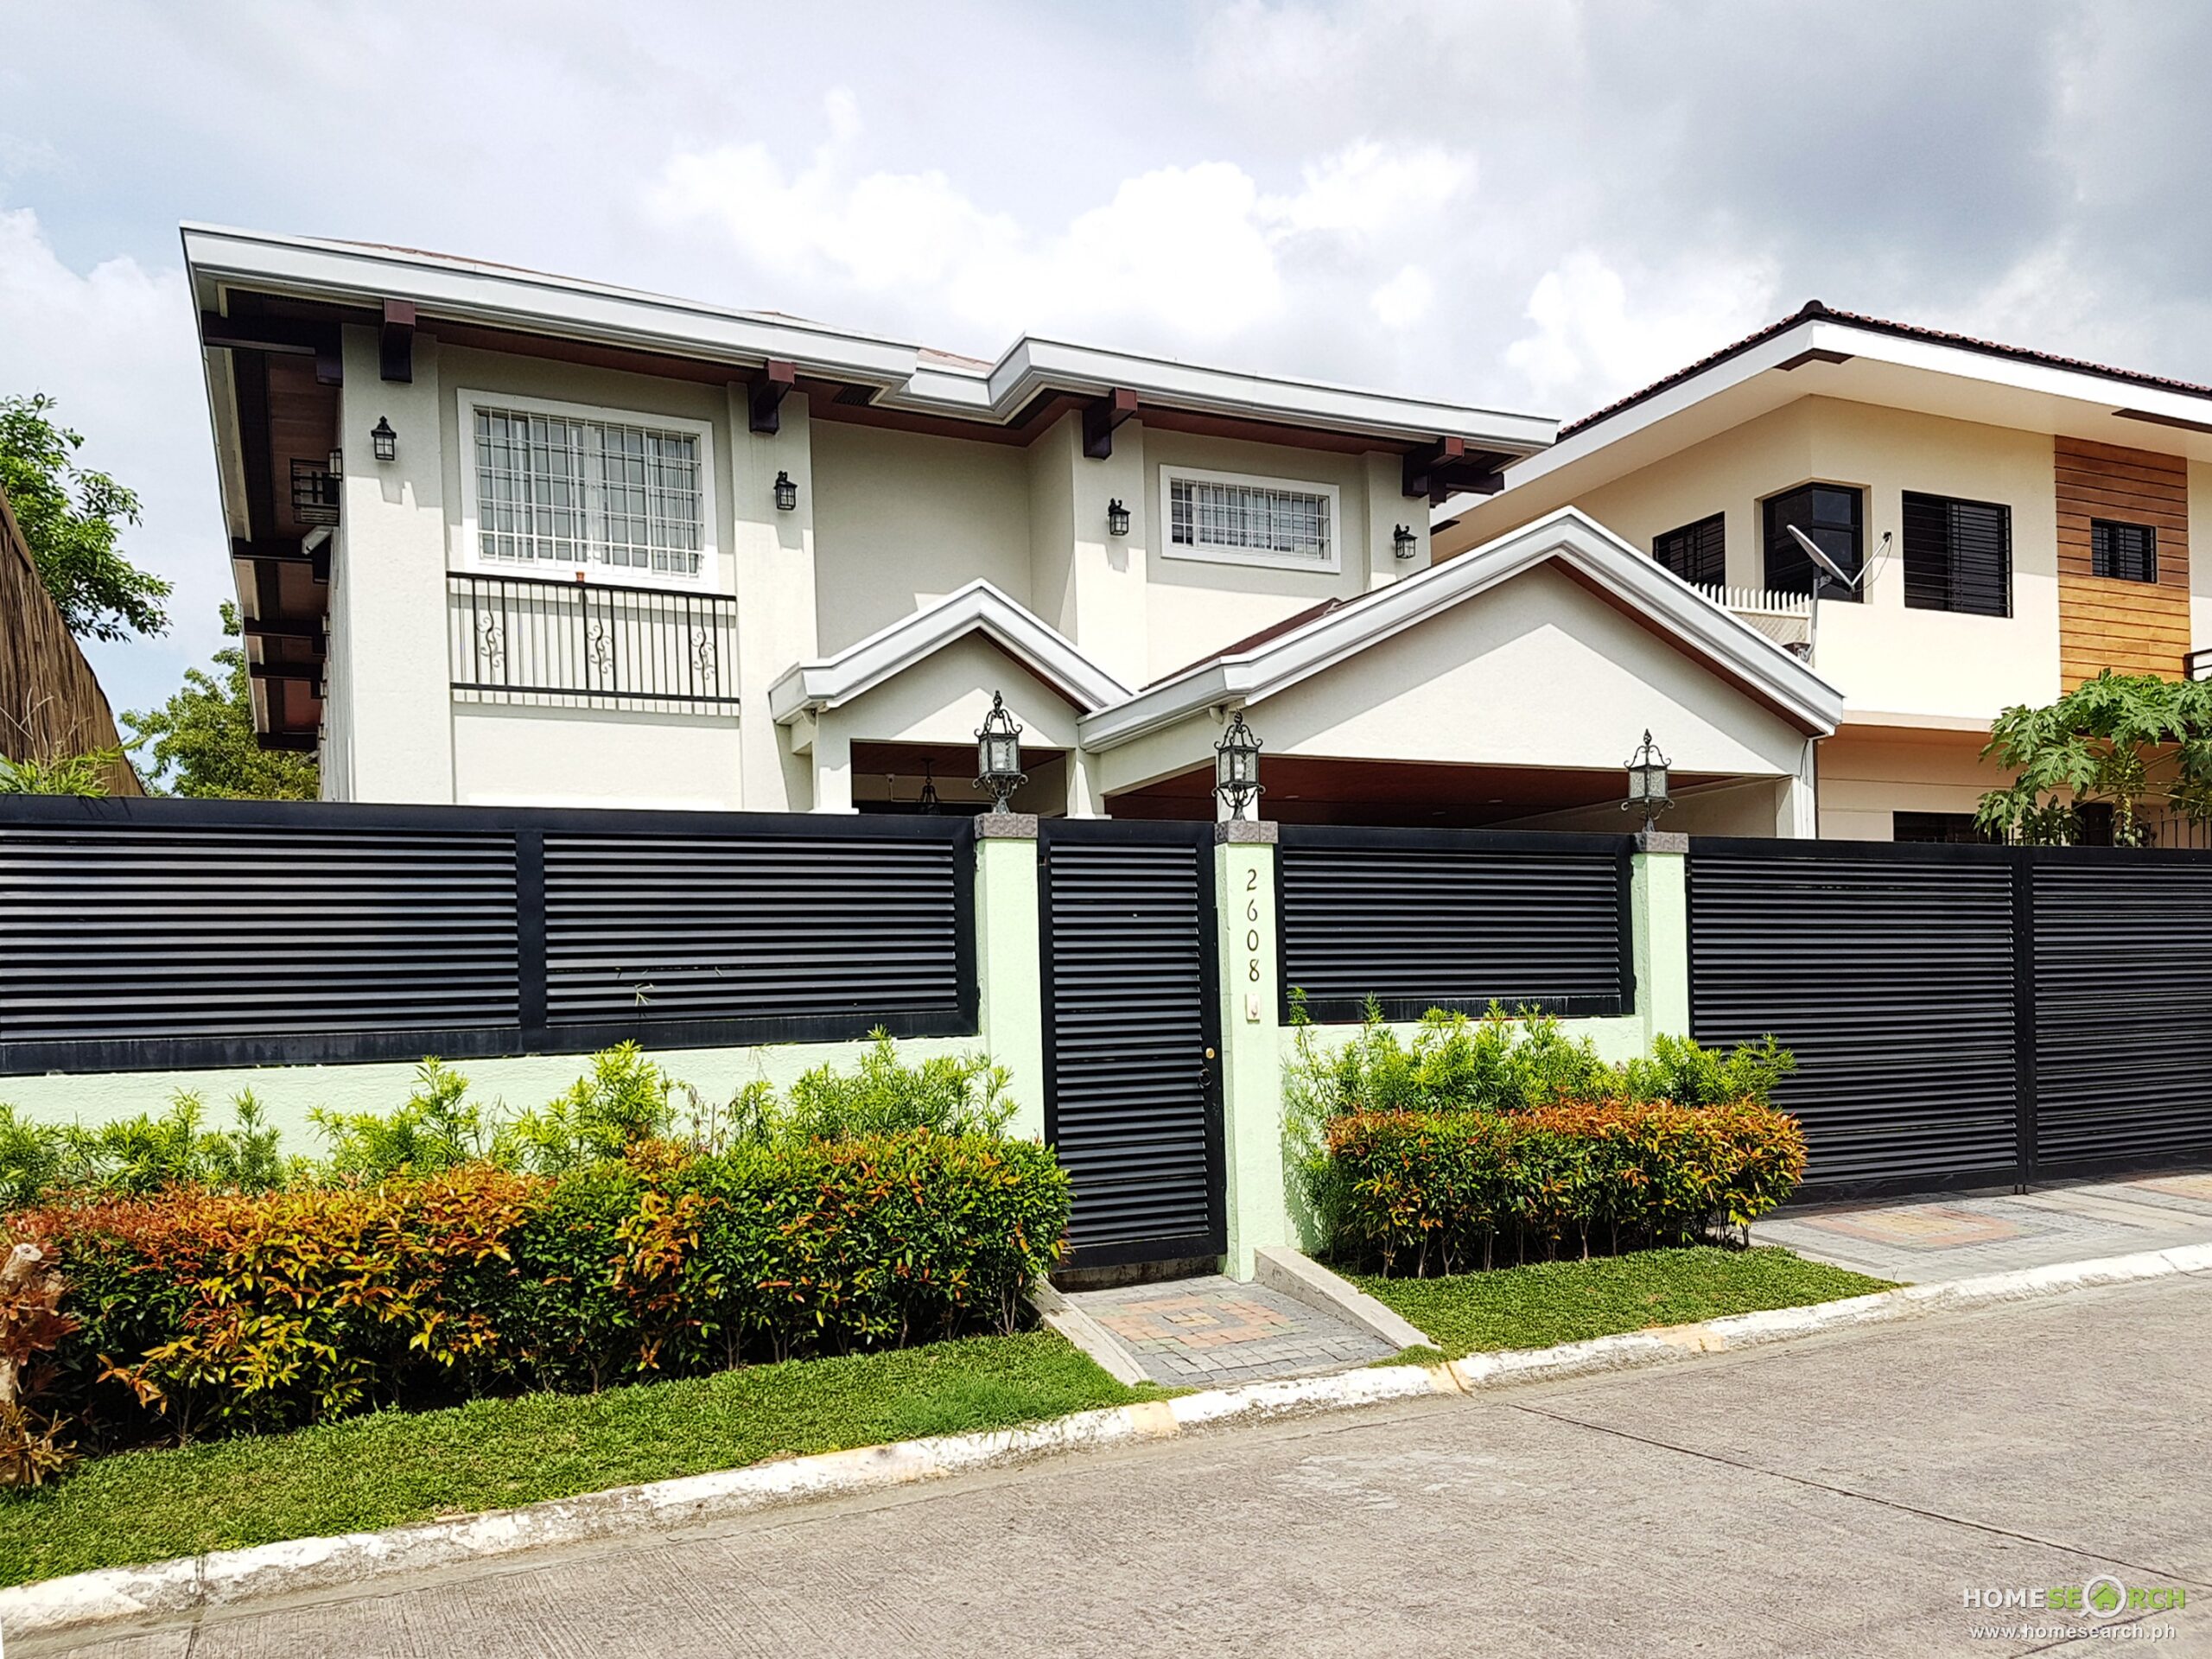 7-bedroom Contemporary Home With Front Garden For Sale in BF Paranaque